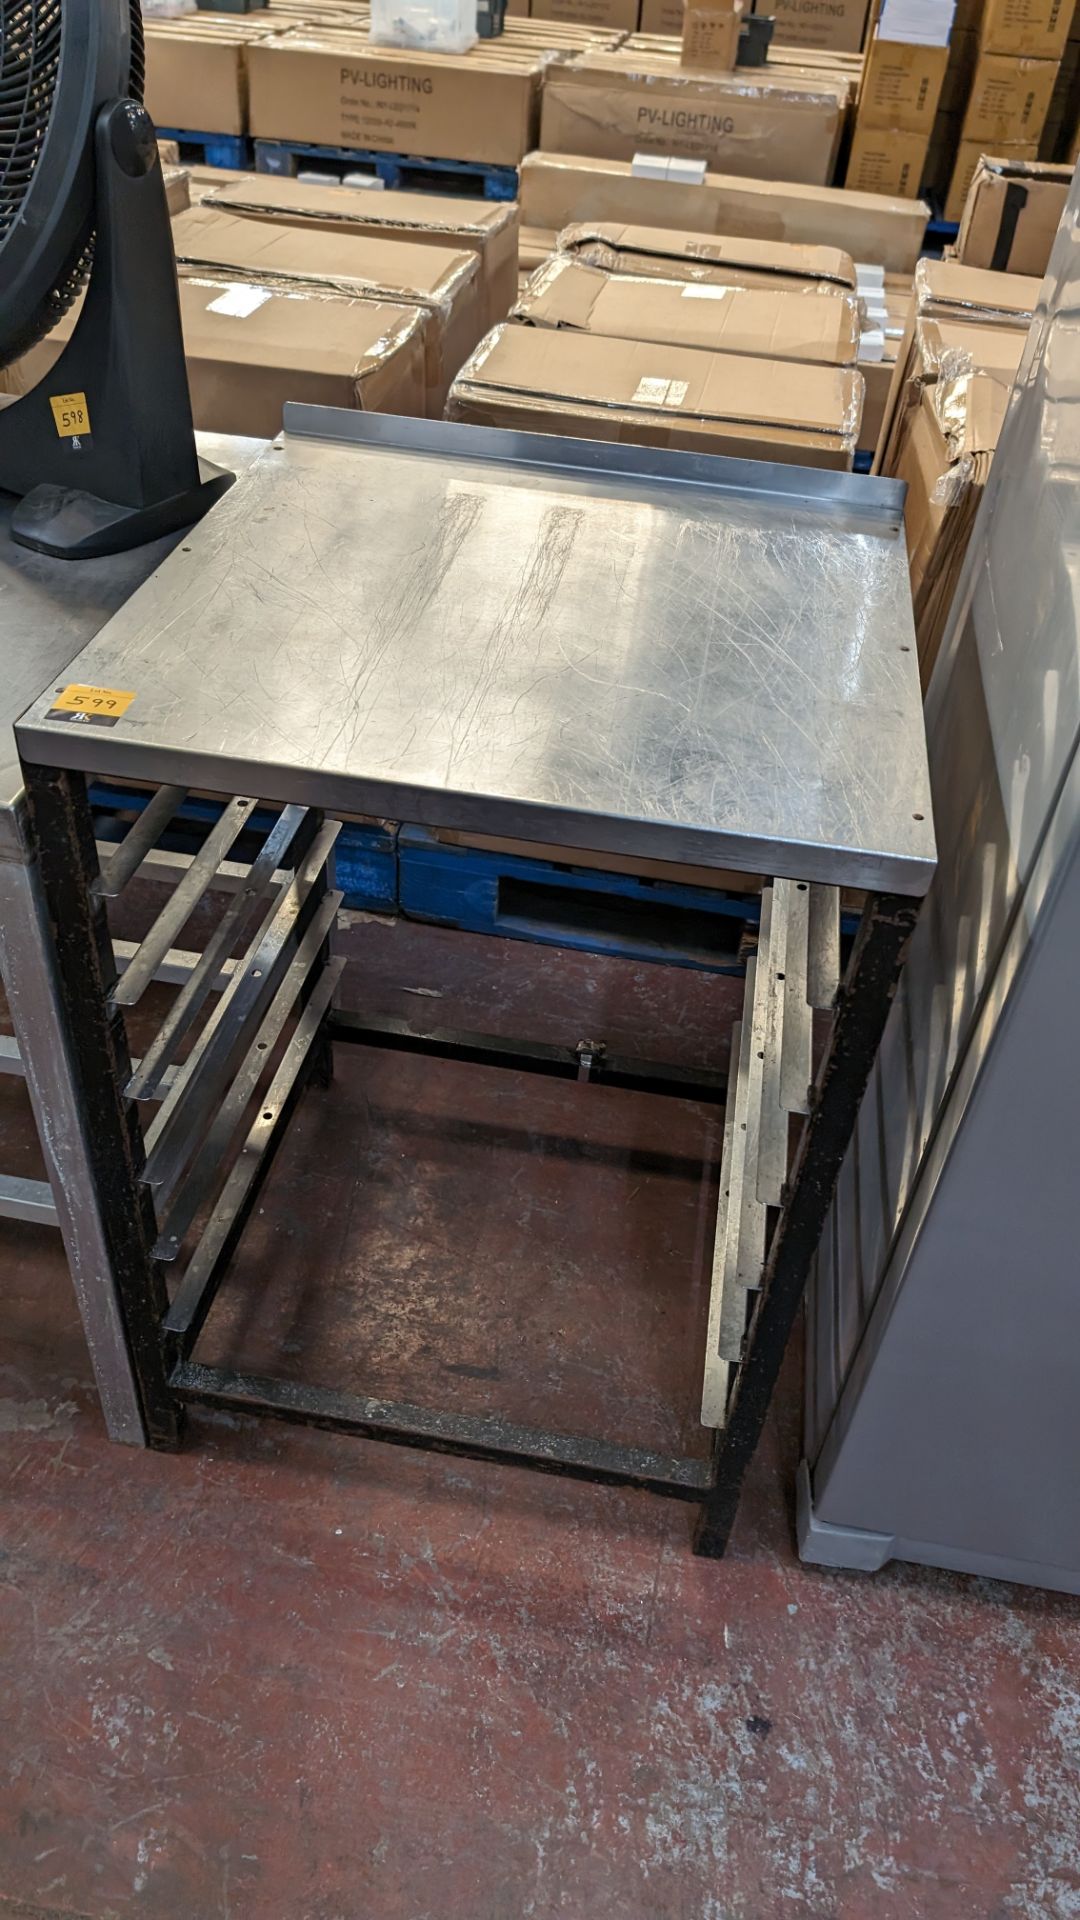 Stainless steel table with capacity for holding trays below, assumed to be for use for commercial di - Image 4 of 4